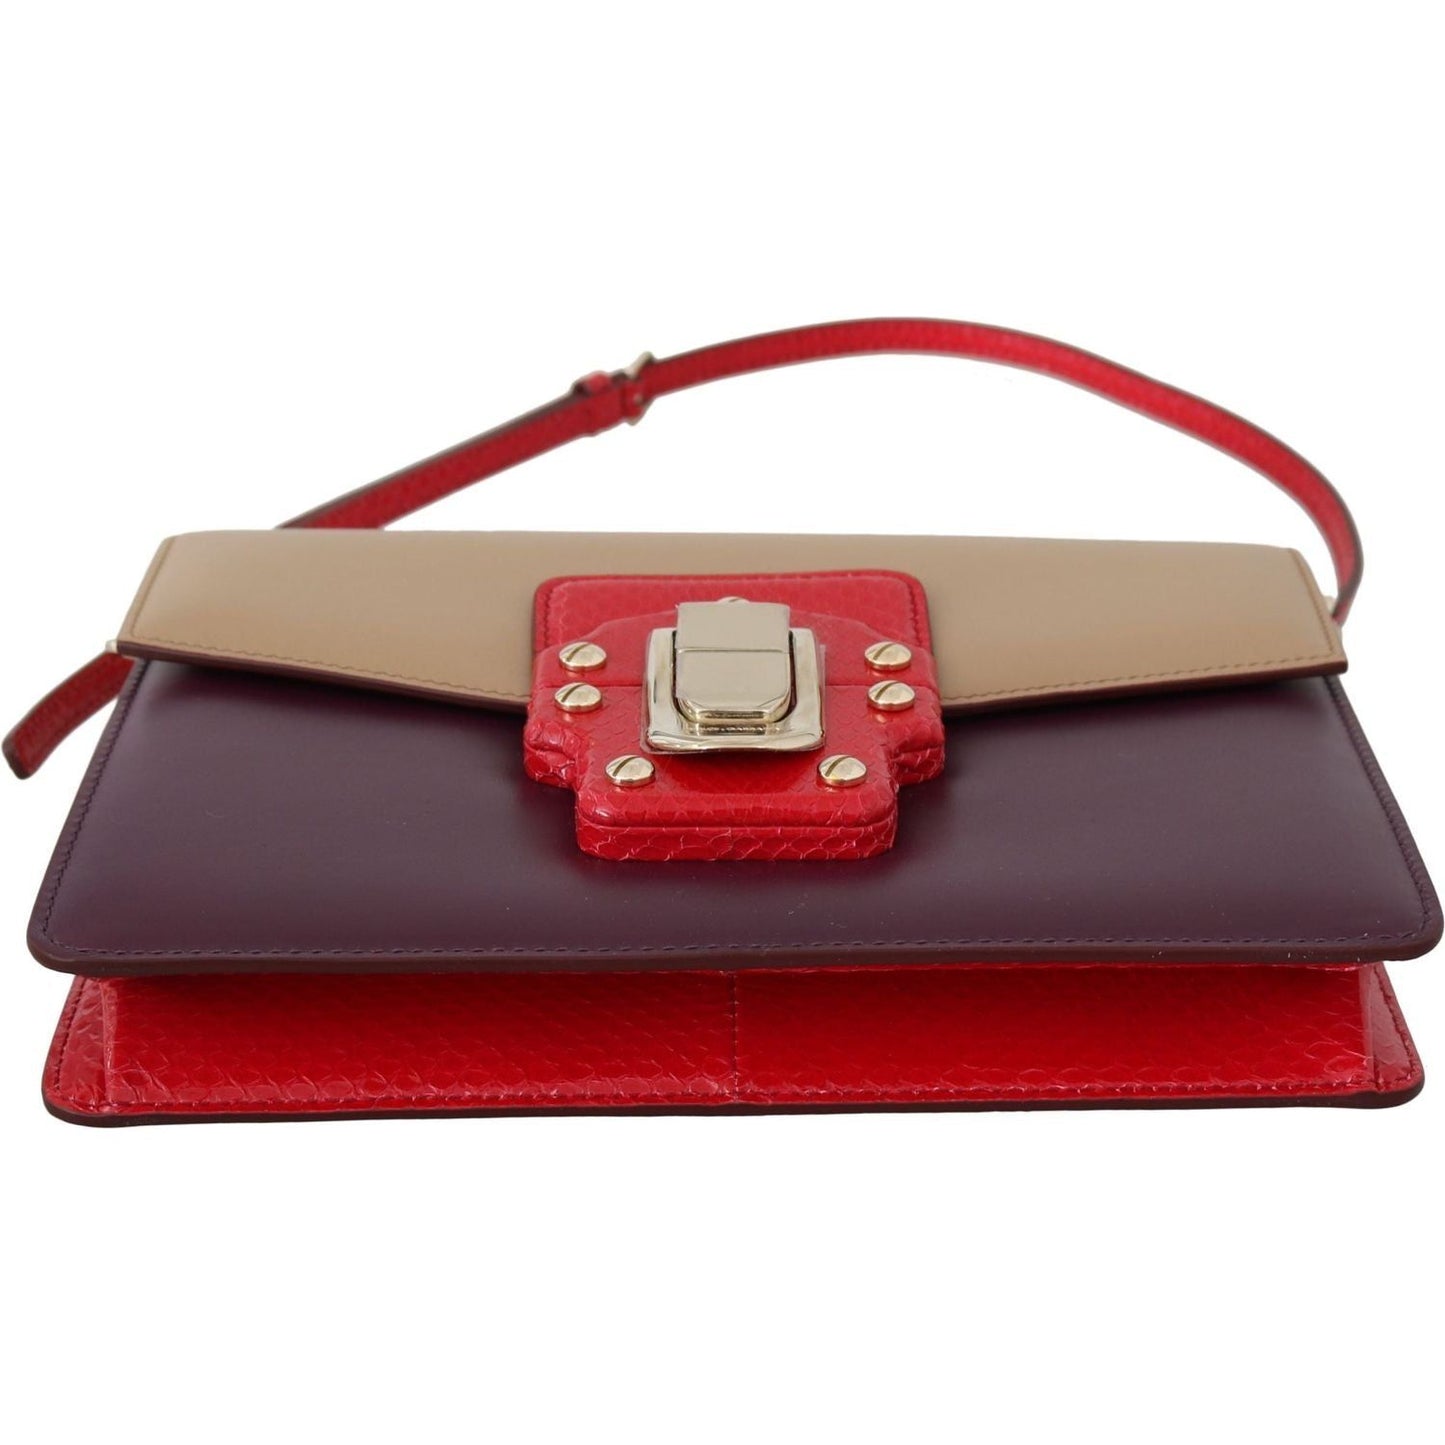 Dolce & Gabbana Exquisite LUCIA Leather Shoulder Bag Purse purple-beige-red-leather-crossbody-purse-bag IMG_0376-1-scaled-679ba6d3-f59.jpg